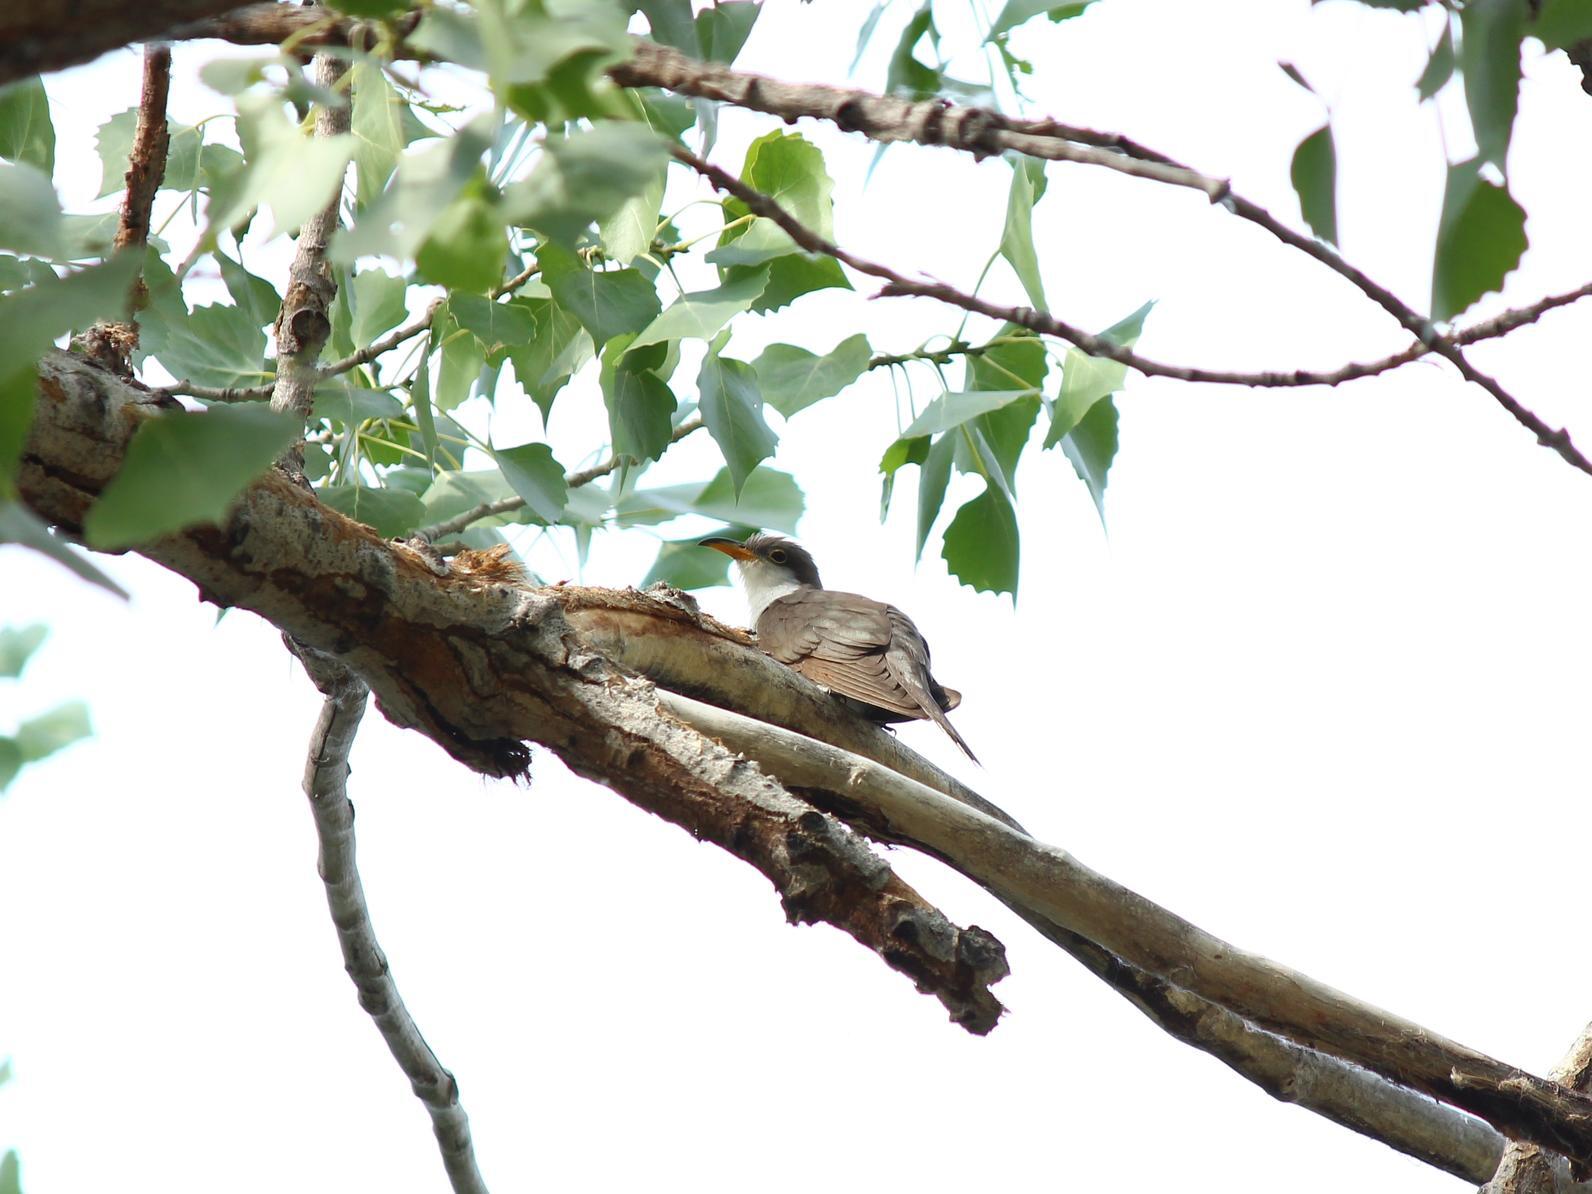 A Western Yellow-billed Cuckoo perches above the viewer on a leafy branch.